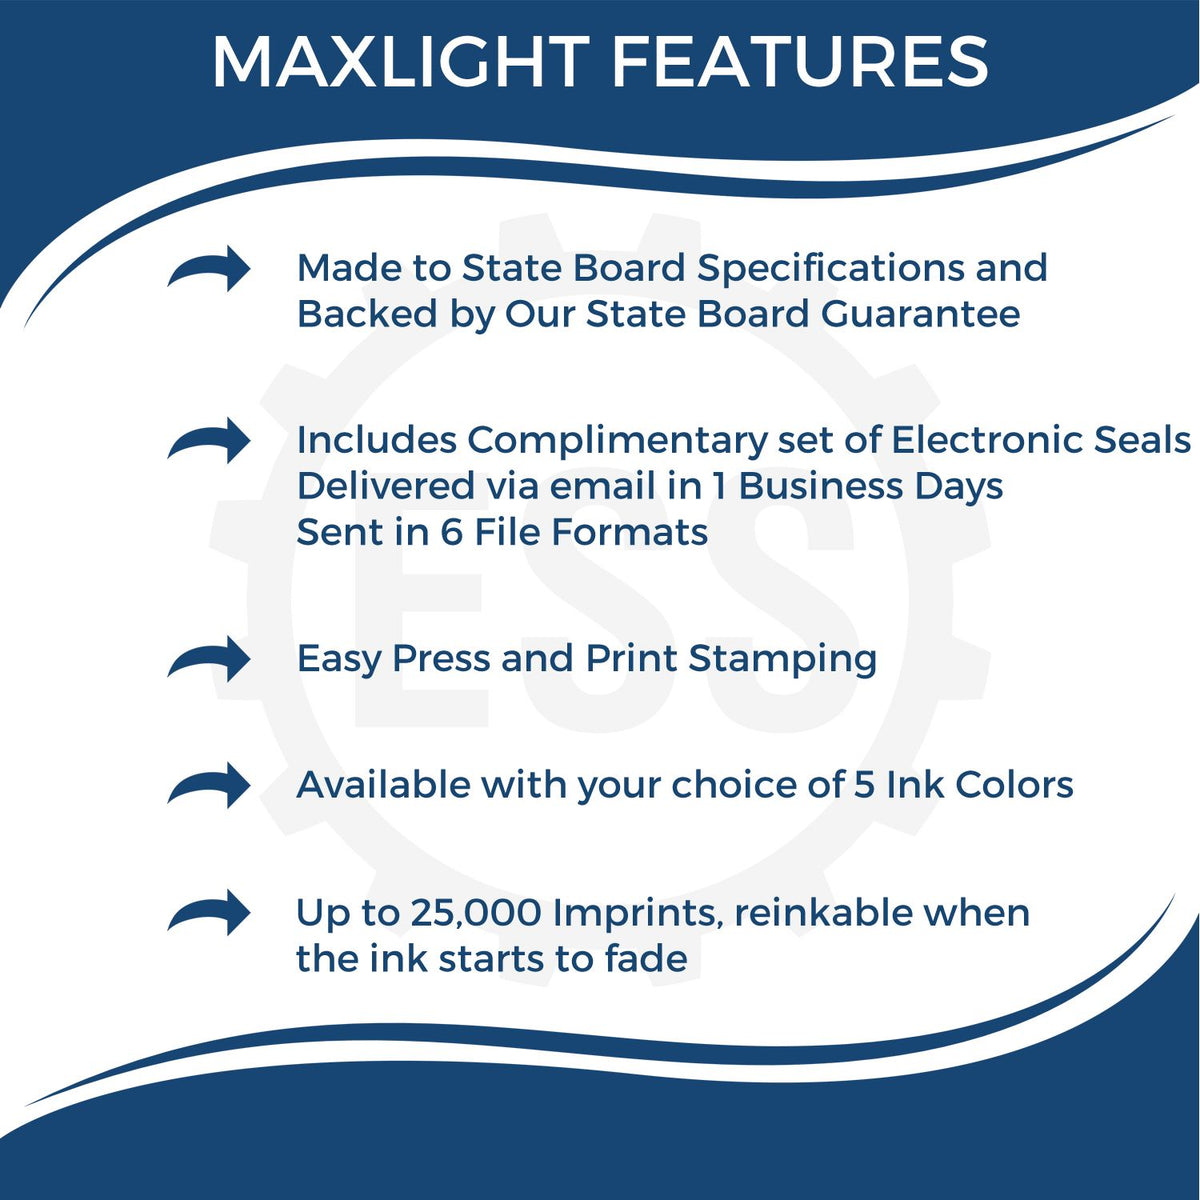 A picture of an infographic highlighting the selling points for the Premium MaxLight Pre-Inked Virginia Engineering Stamp